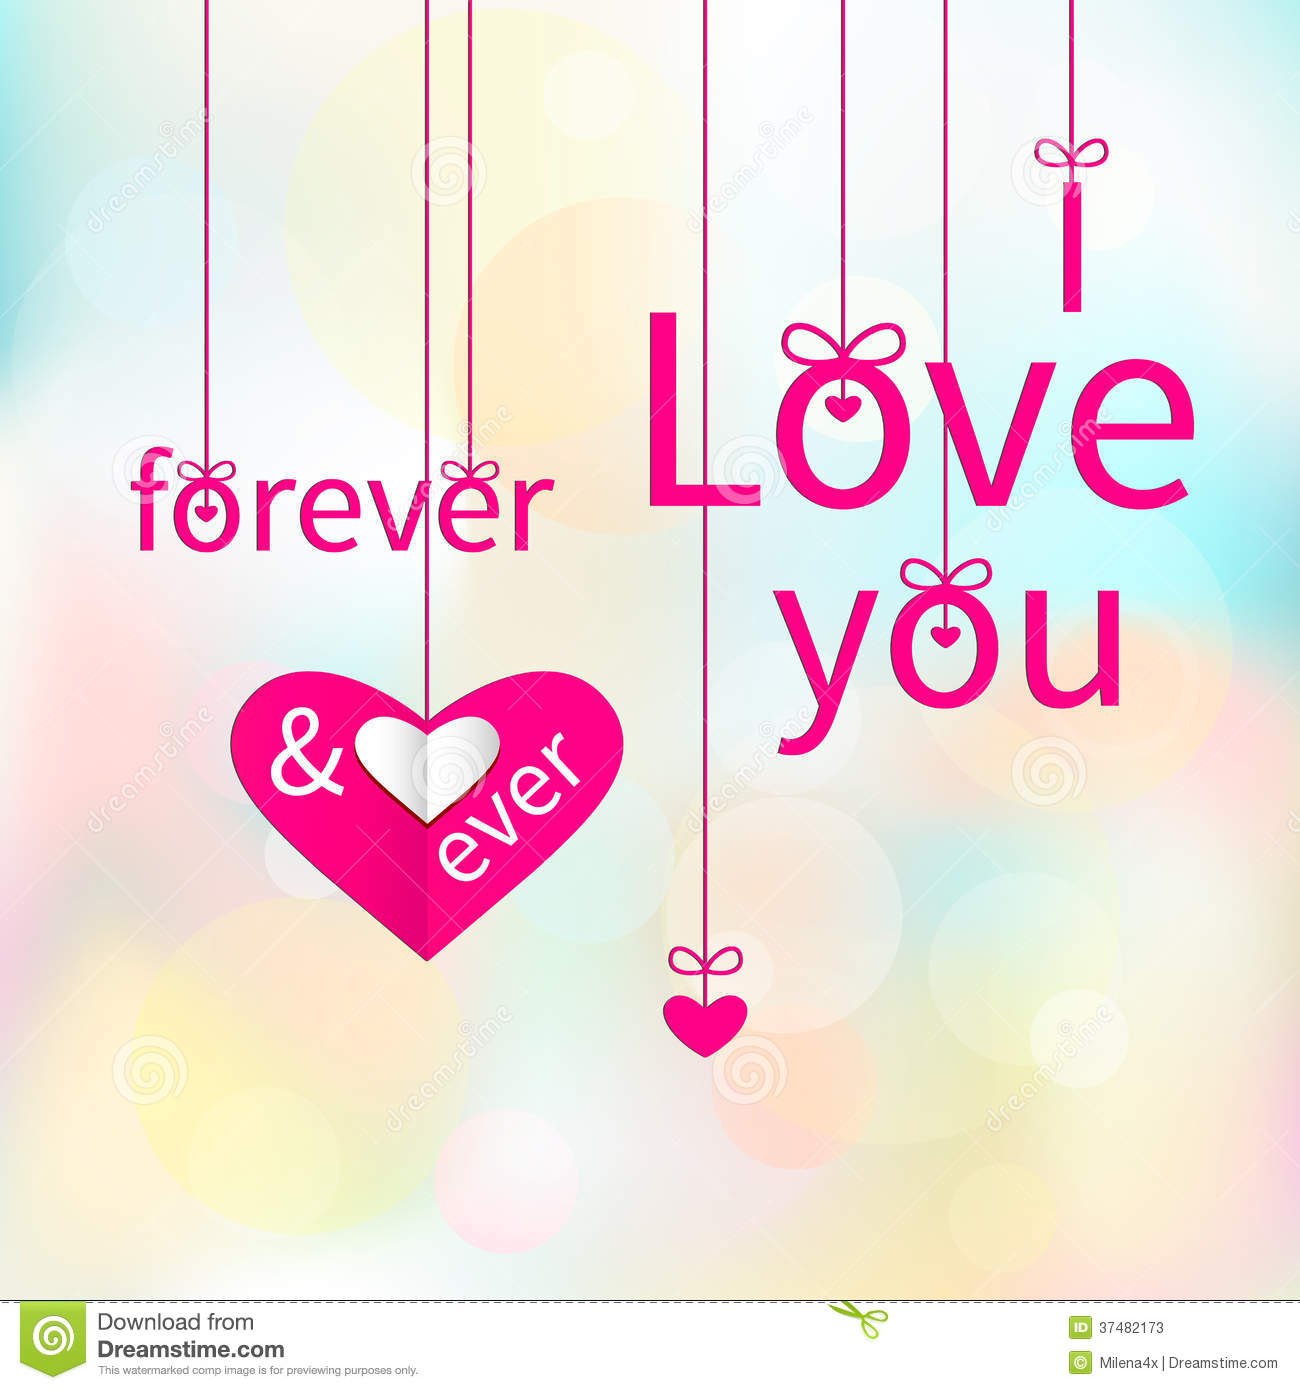 I Love You Forever & Ever Cute Image